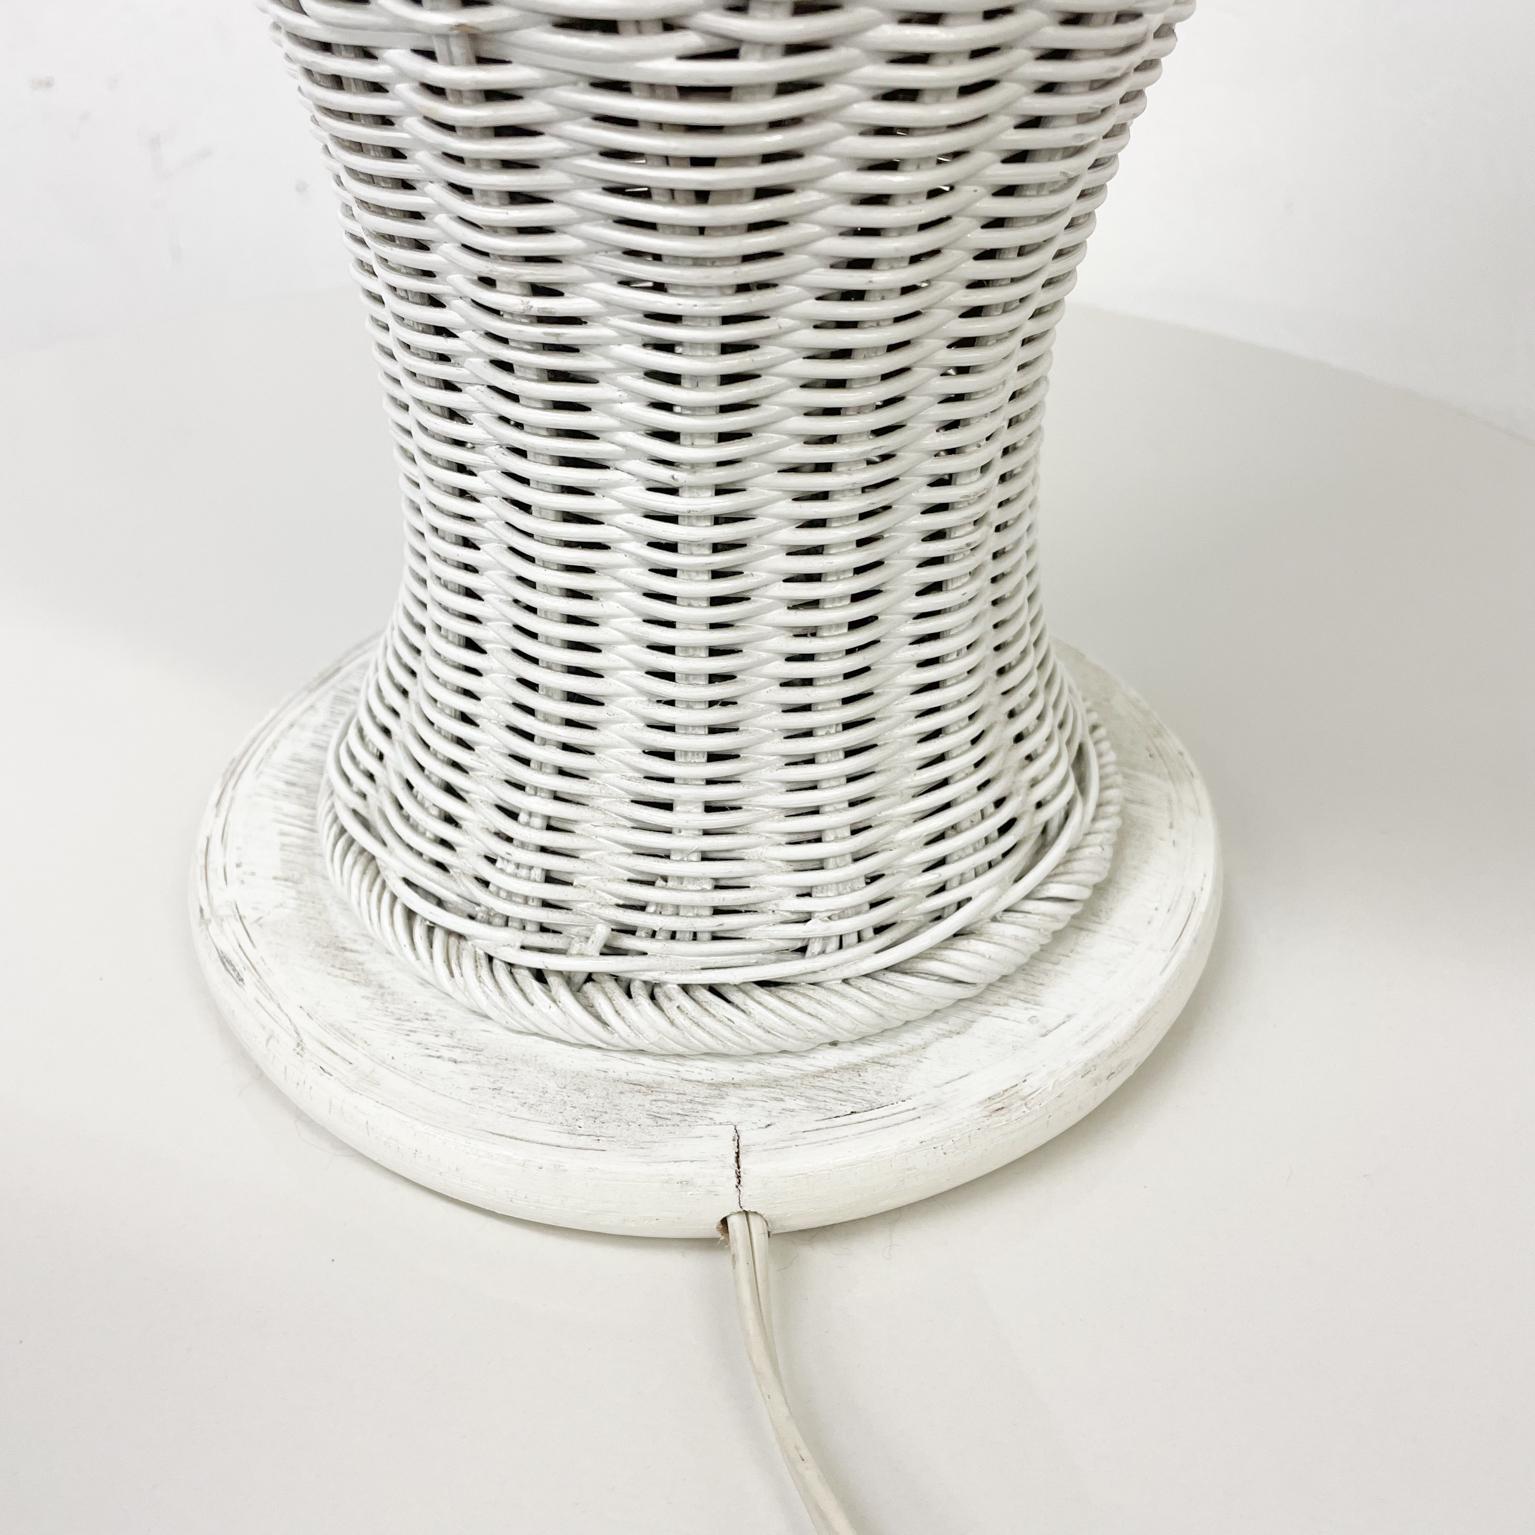 1970s Pretty Vintage White Wicker Sculptural Table Lamp Scalloped Dome Shade 1